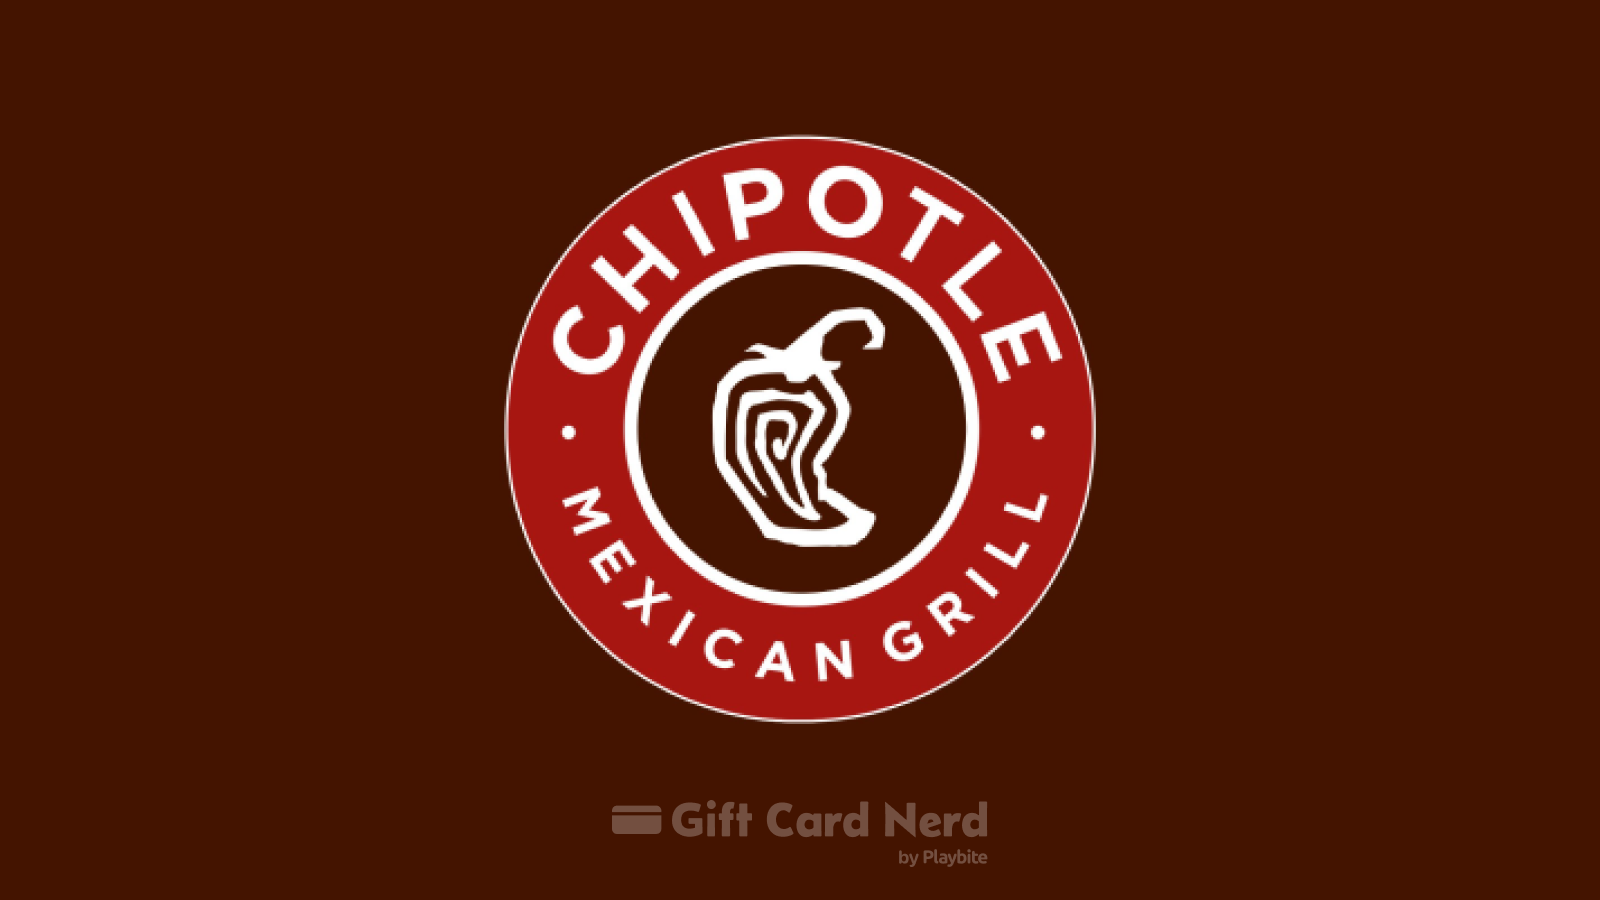 How to Check Your Chipotle Gift Card Balance